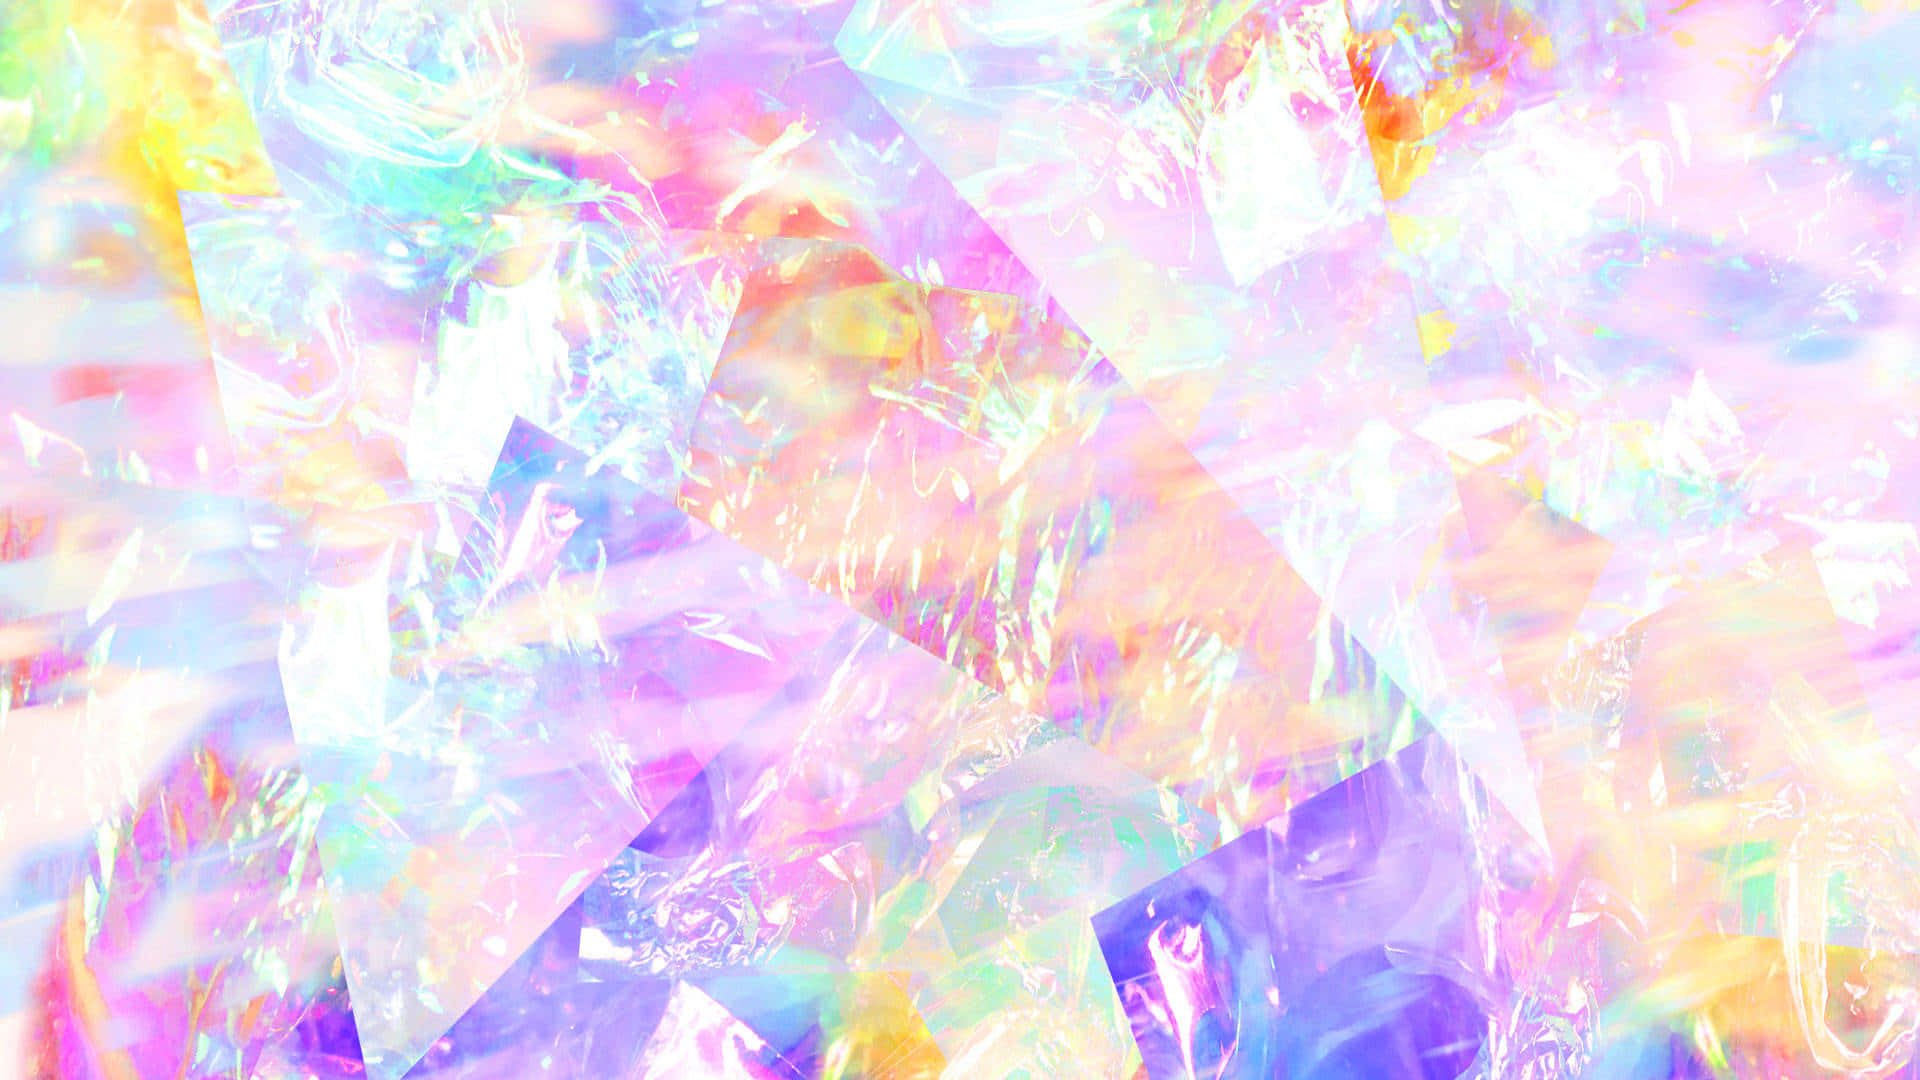 Pink, Purple and Blue Geometric Shapes Form a Gorgeous&Mesmerizing Pastel Crystal Wallpaper